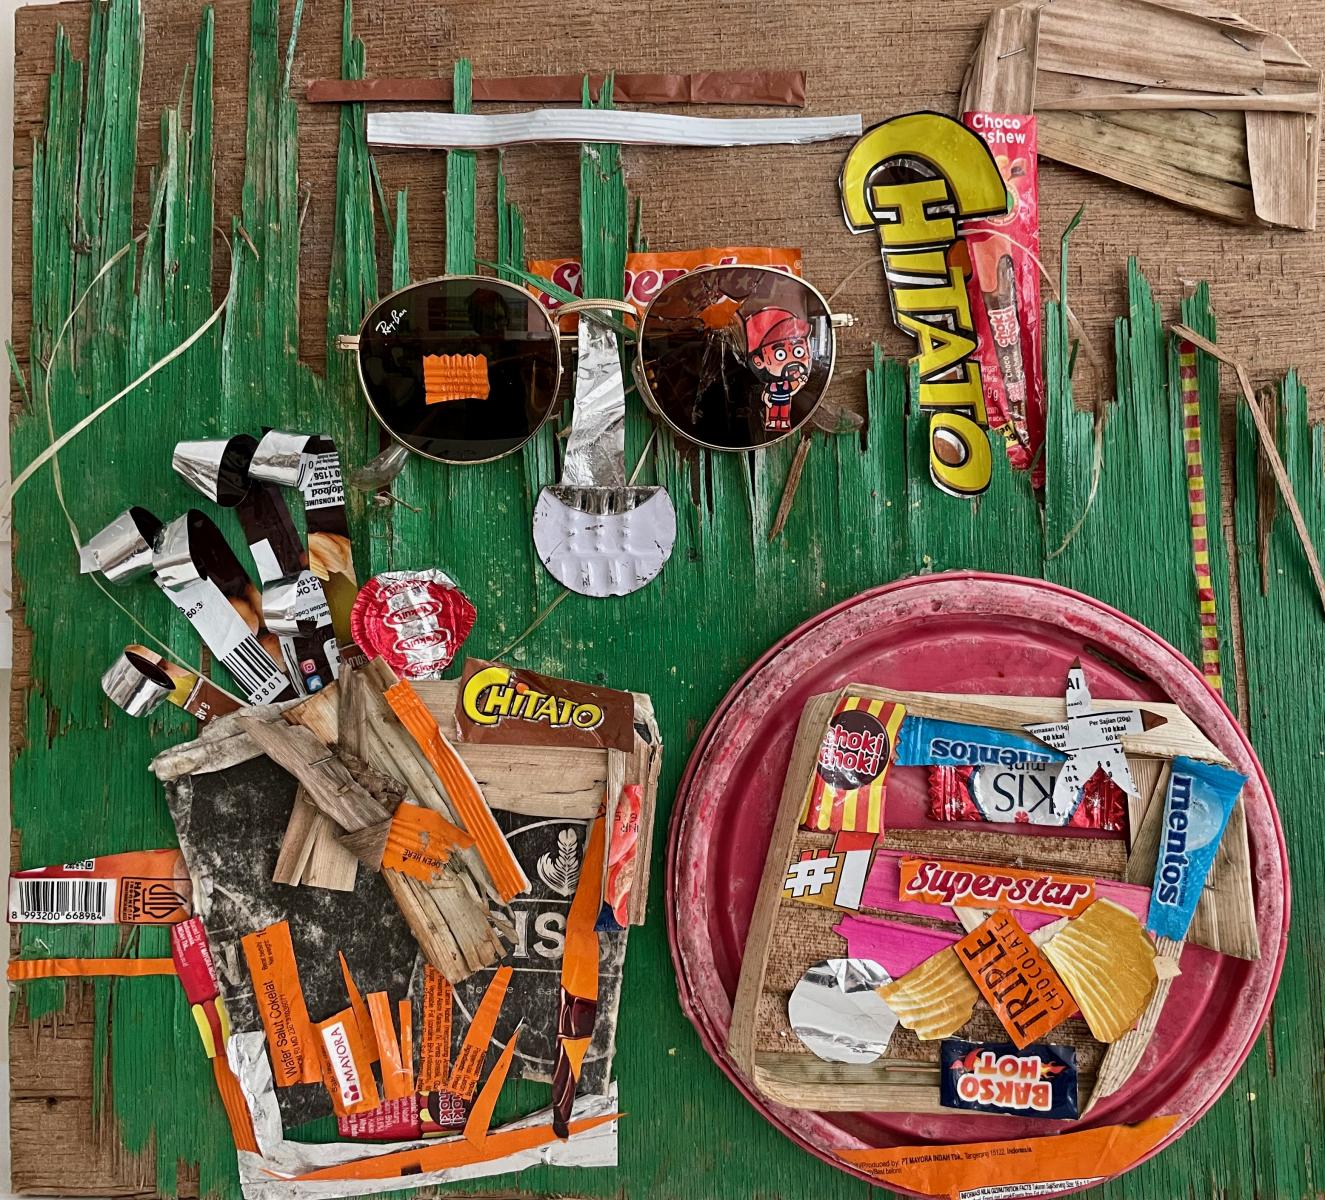 Offerings collected from a construction site in Ubud, Bali
14 1/4" w x 13 1/2" h : Bali Collages : ART UNDERFOOT :: CAROL BASTIEN